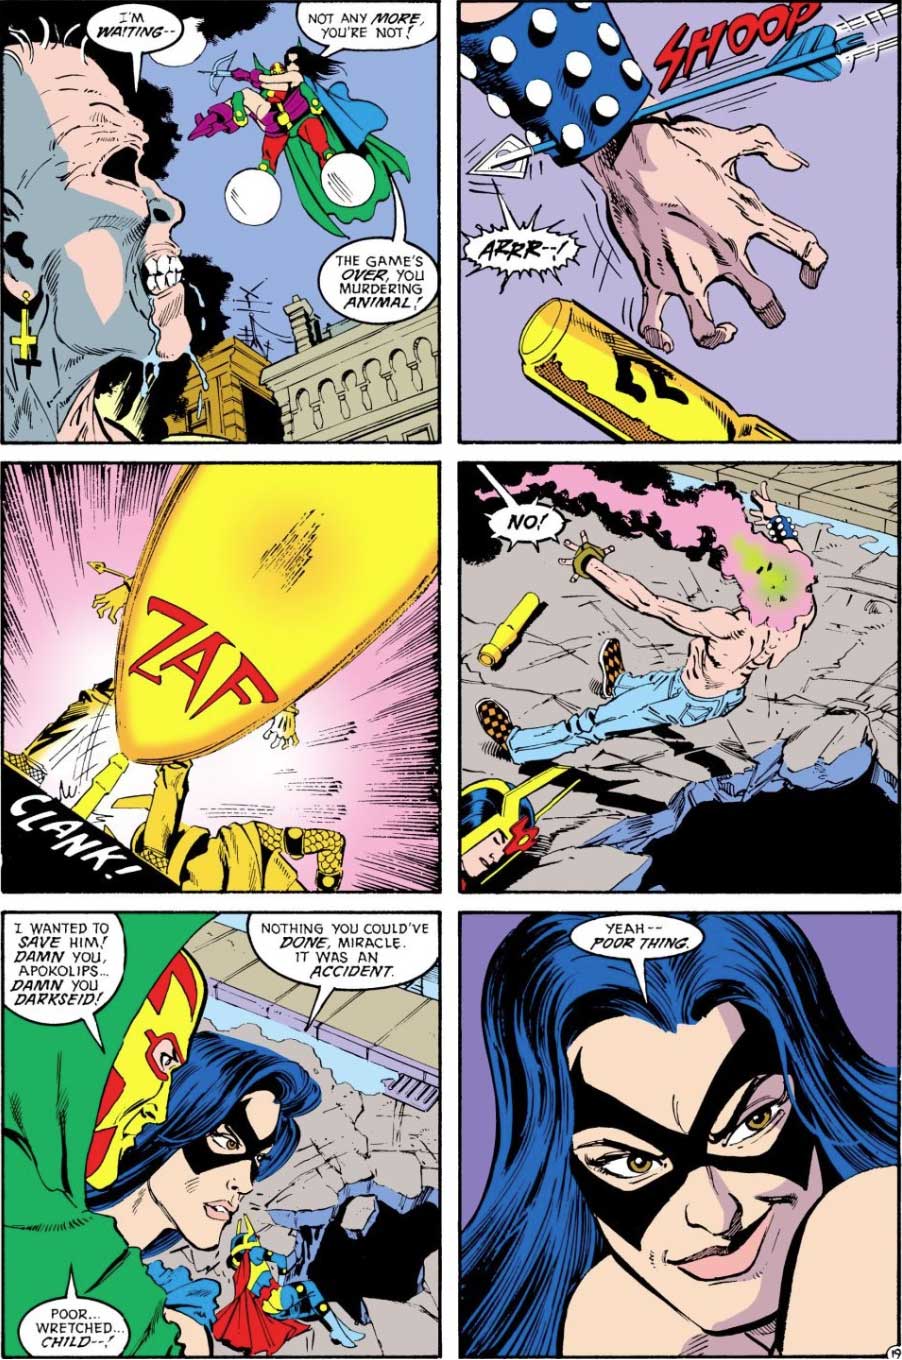 Justice League America #30 by Keith Giffen, J.M. DeMatteis, Bill Willingham, and Joe Rubinstein